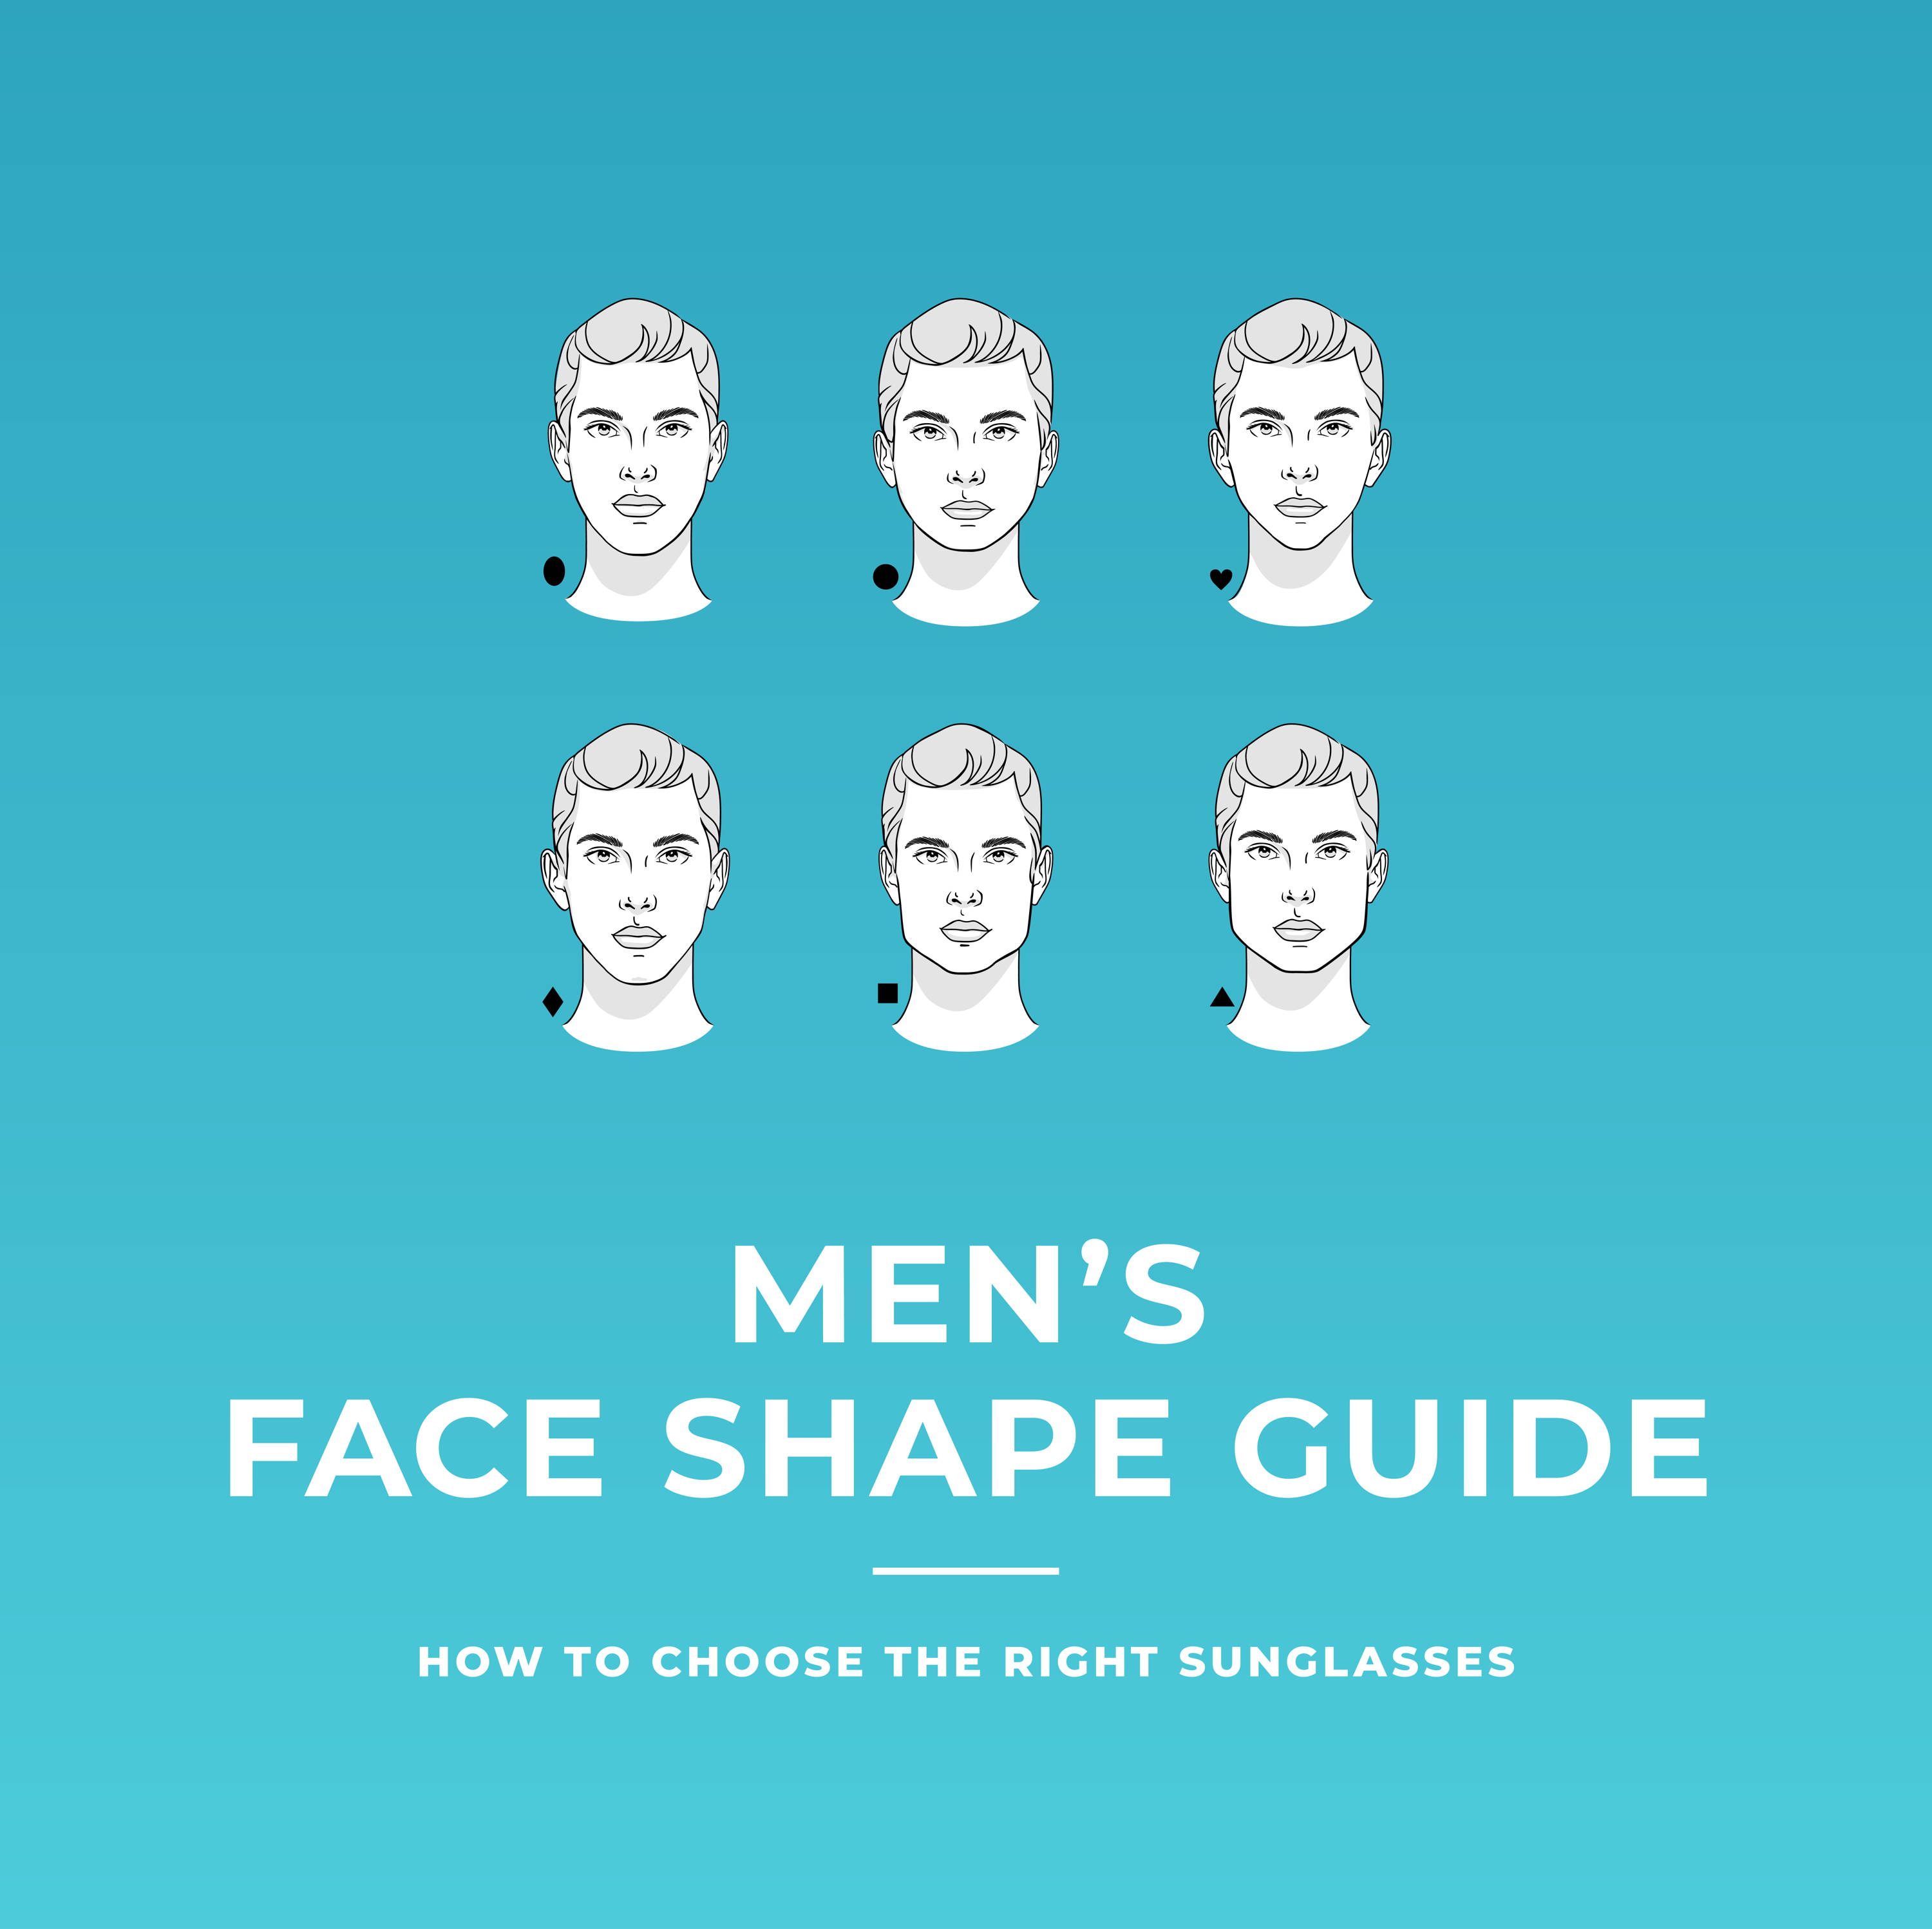 Men's Face Shape Guide: How to Choose the Right Sunglasses